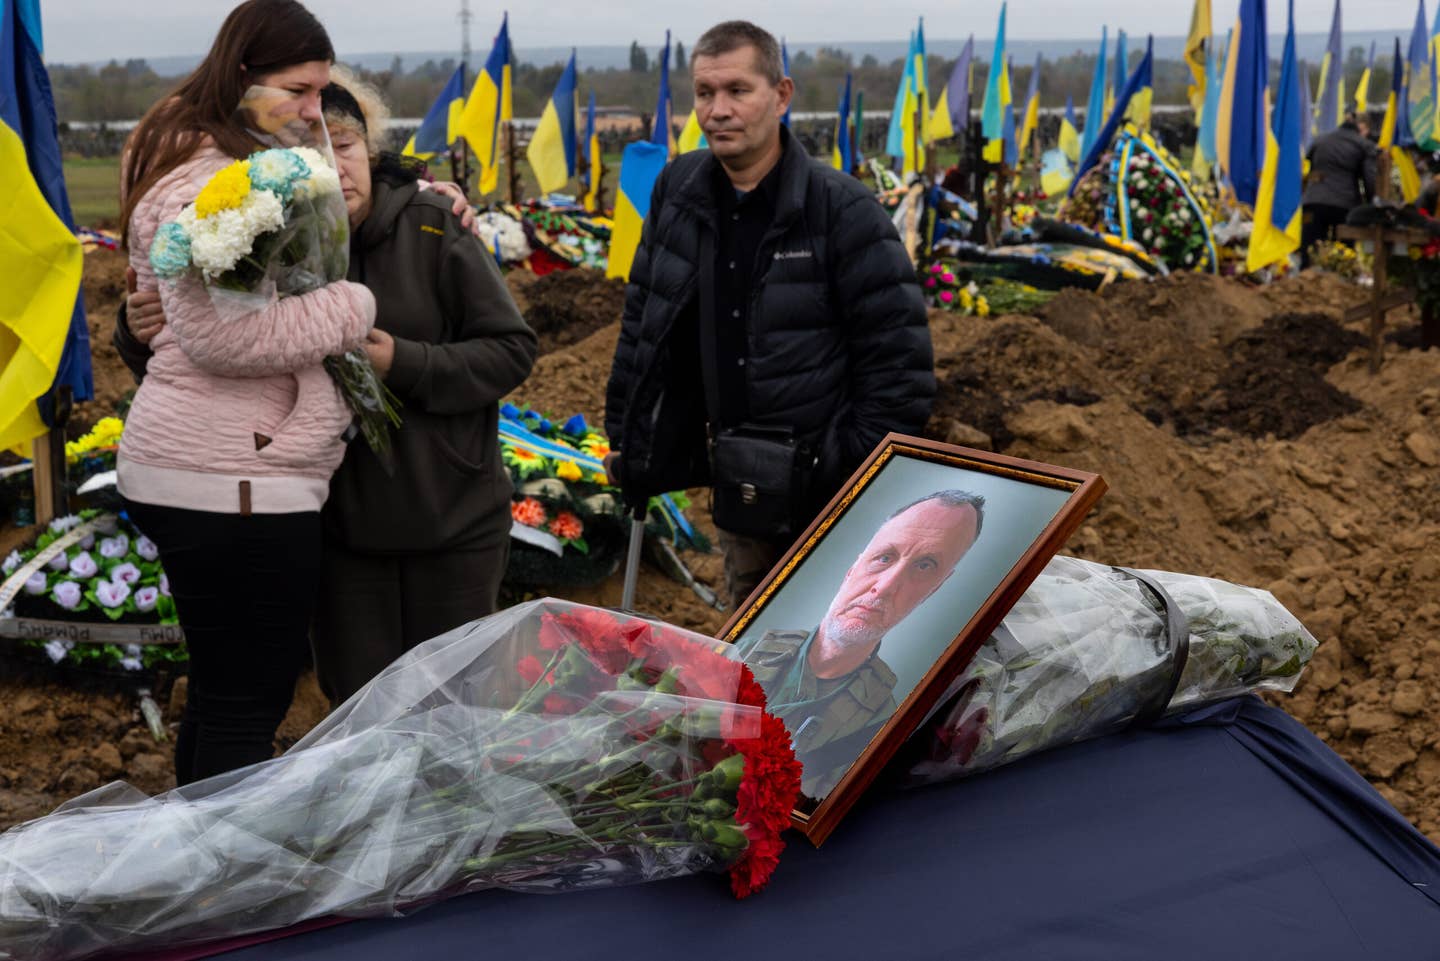 Relatives grieve by the coffin of  Oleksandr Kopylov, 58, who was a soldier missing in action since July 25th in Dementilvka in Kharkiv district during his funeral on Sept. 28 in Kharkiv. (Photo by Paula Bronstein/Getty Images)